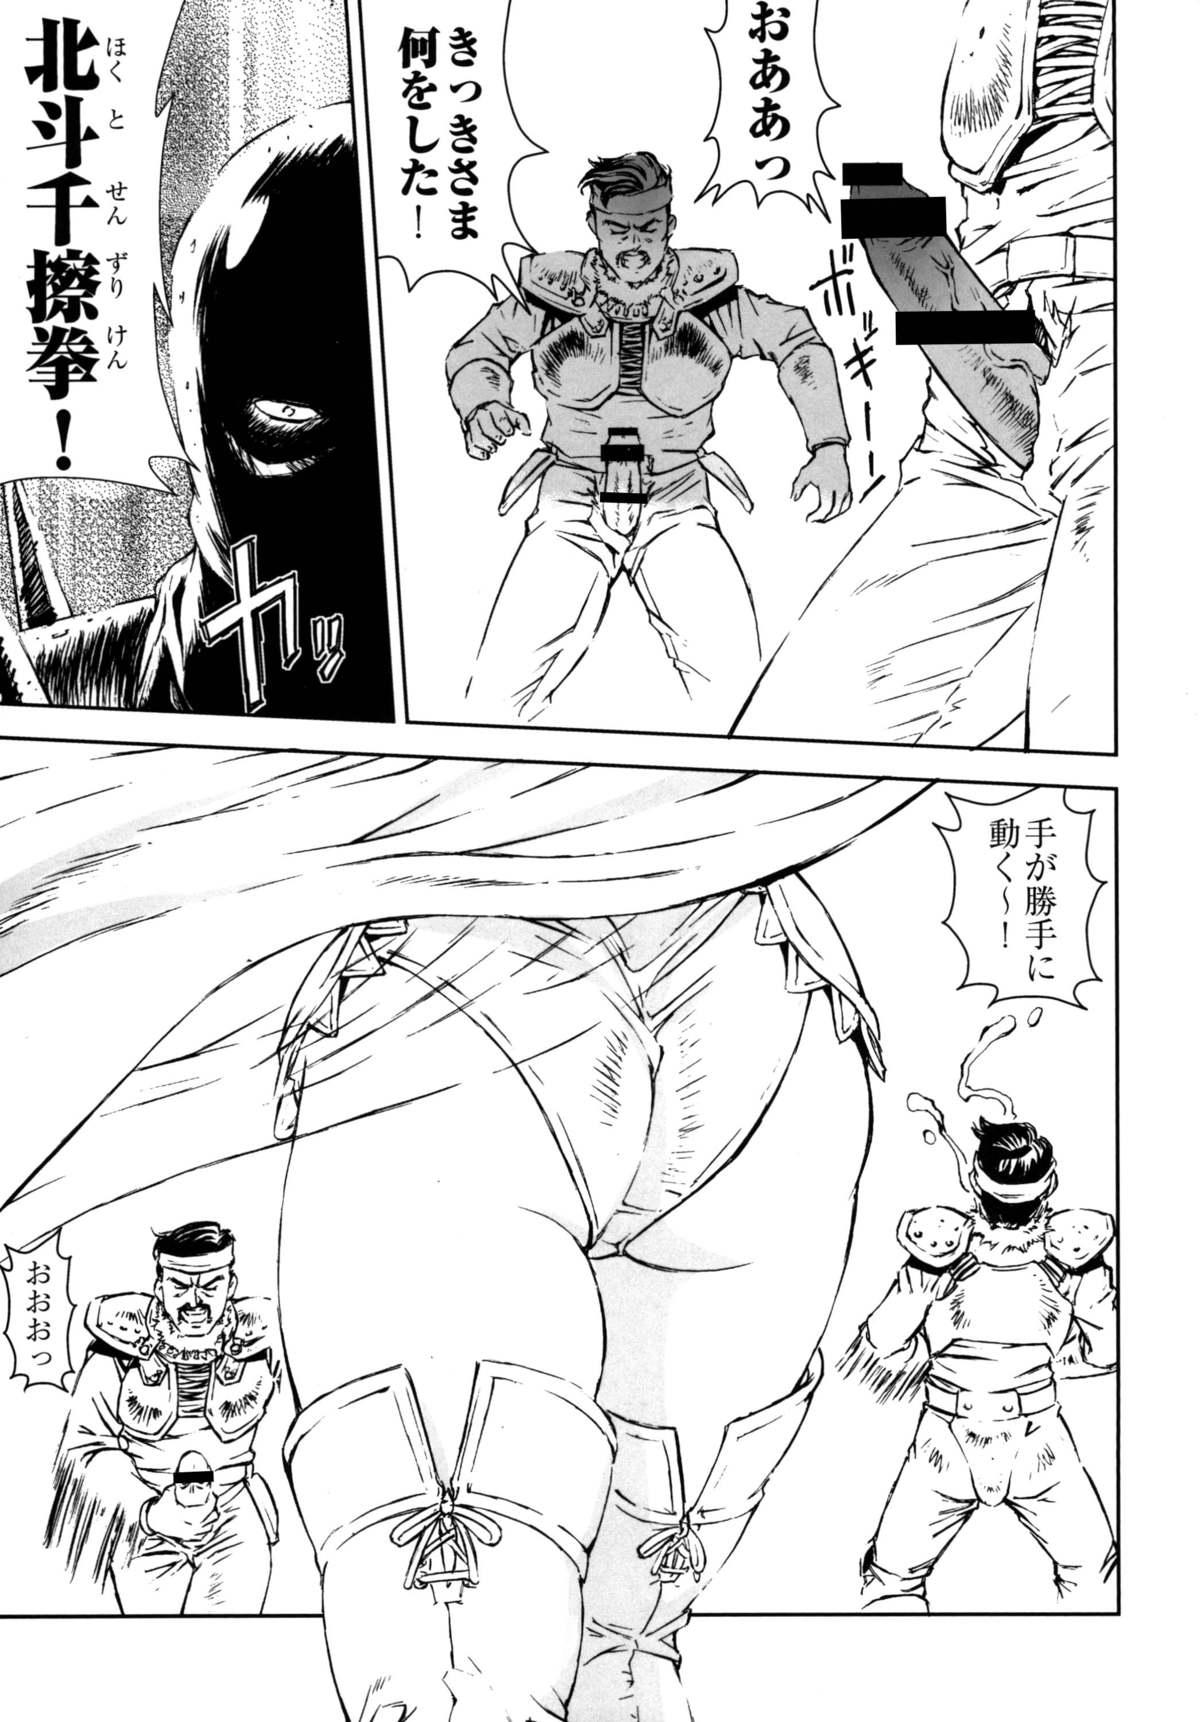 Cams HOT BITCH JUMP 2 - Kochikame Fist of the north star Dick Suckers - Page 6